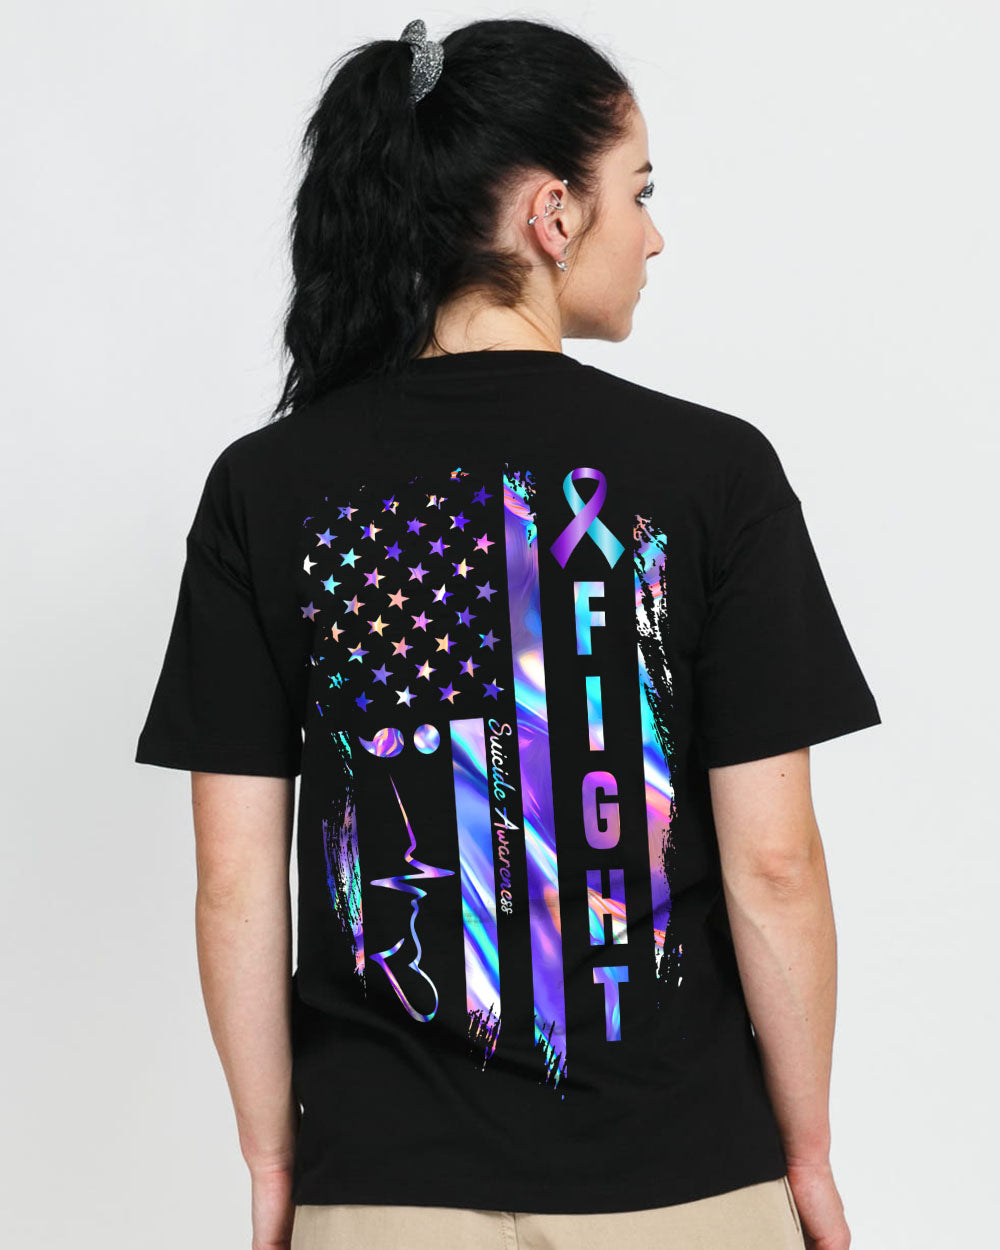 Holo Fight Suicide American Flag Women's Suicide Prevention Awareness Tshirt